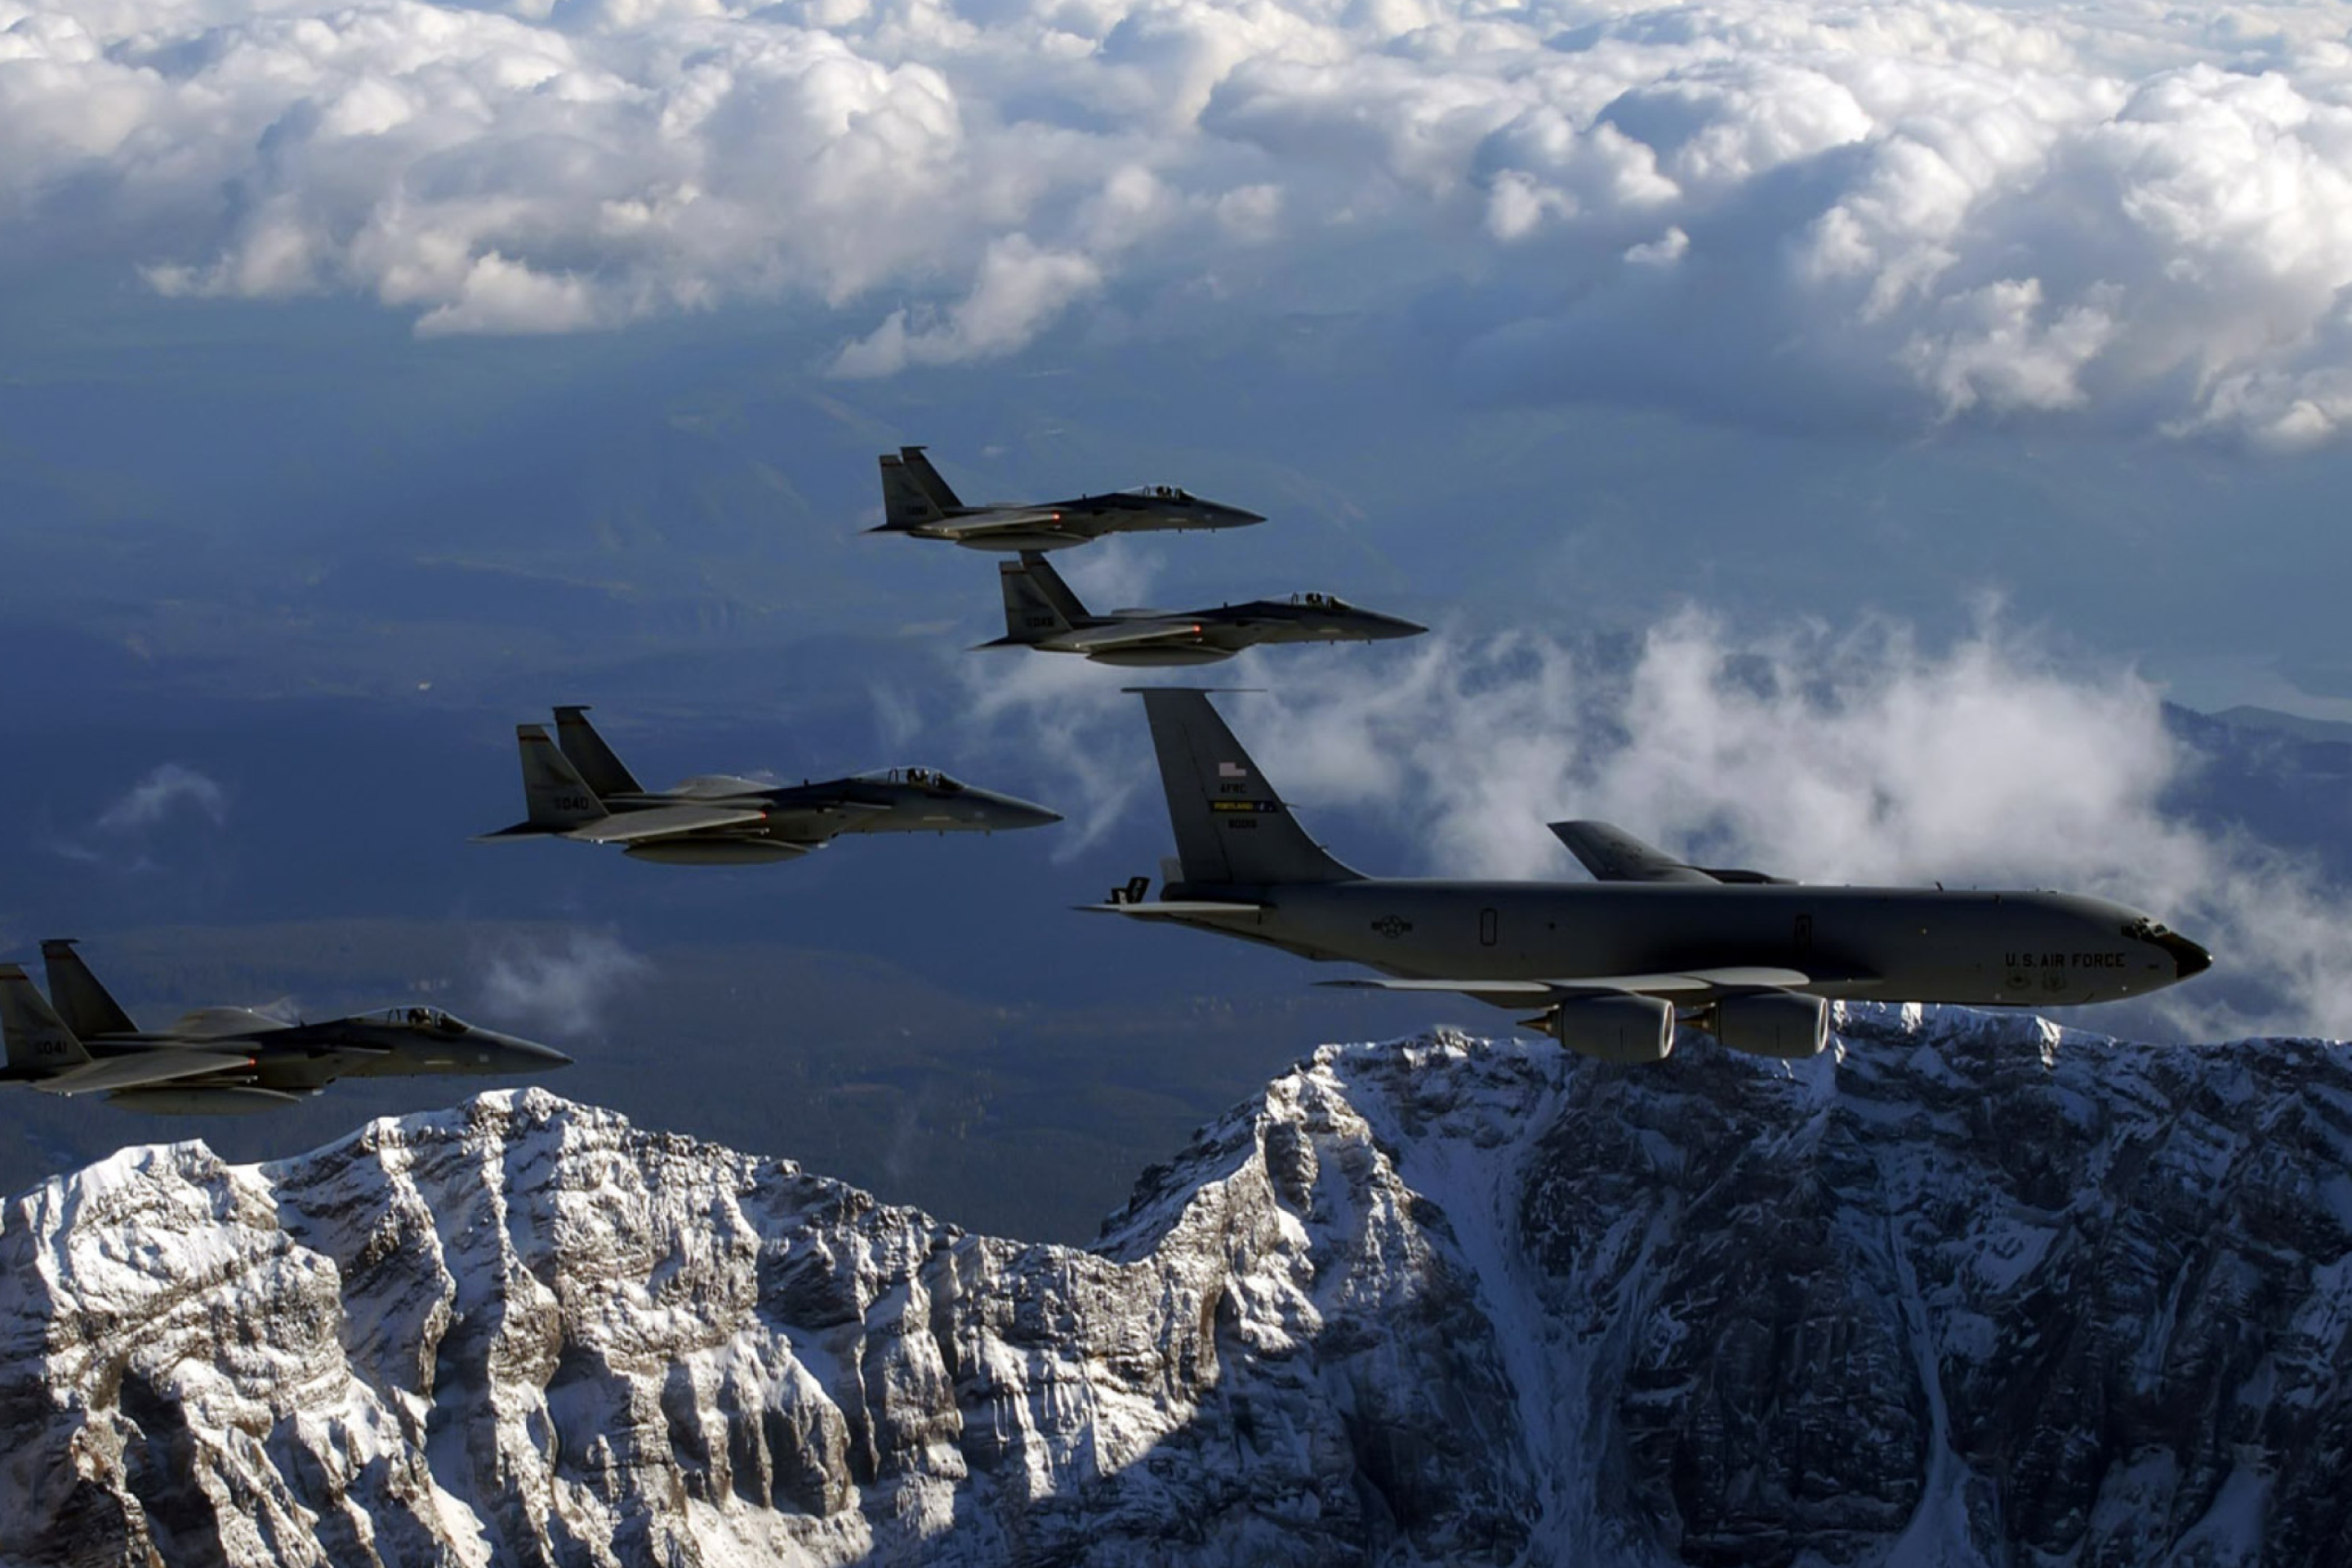 US Air Force Airplanes wallpaper 2880x1920